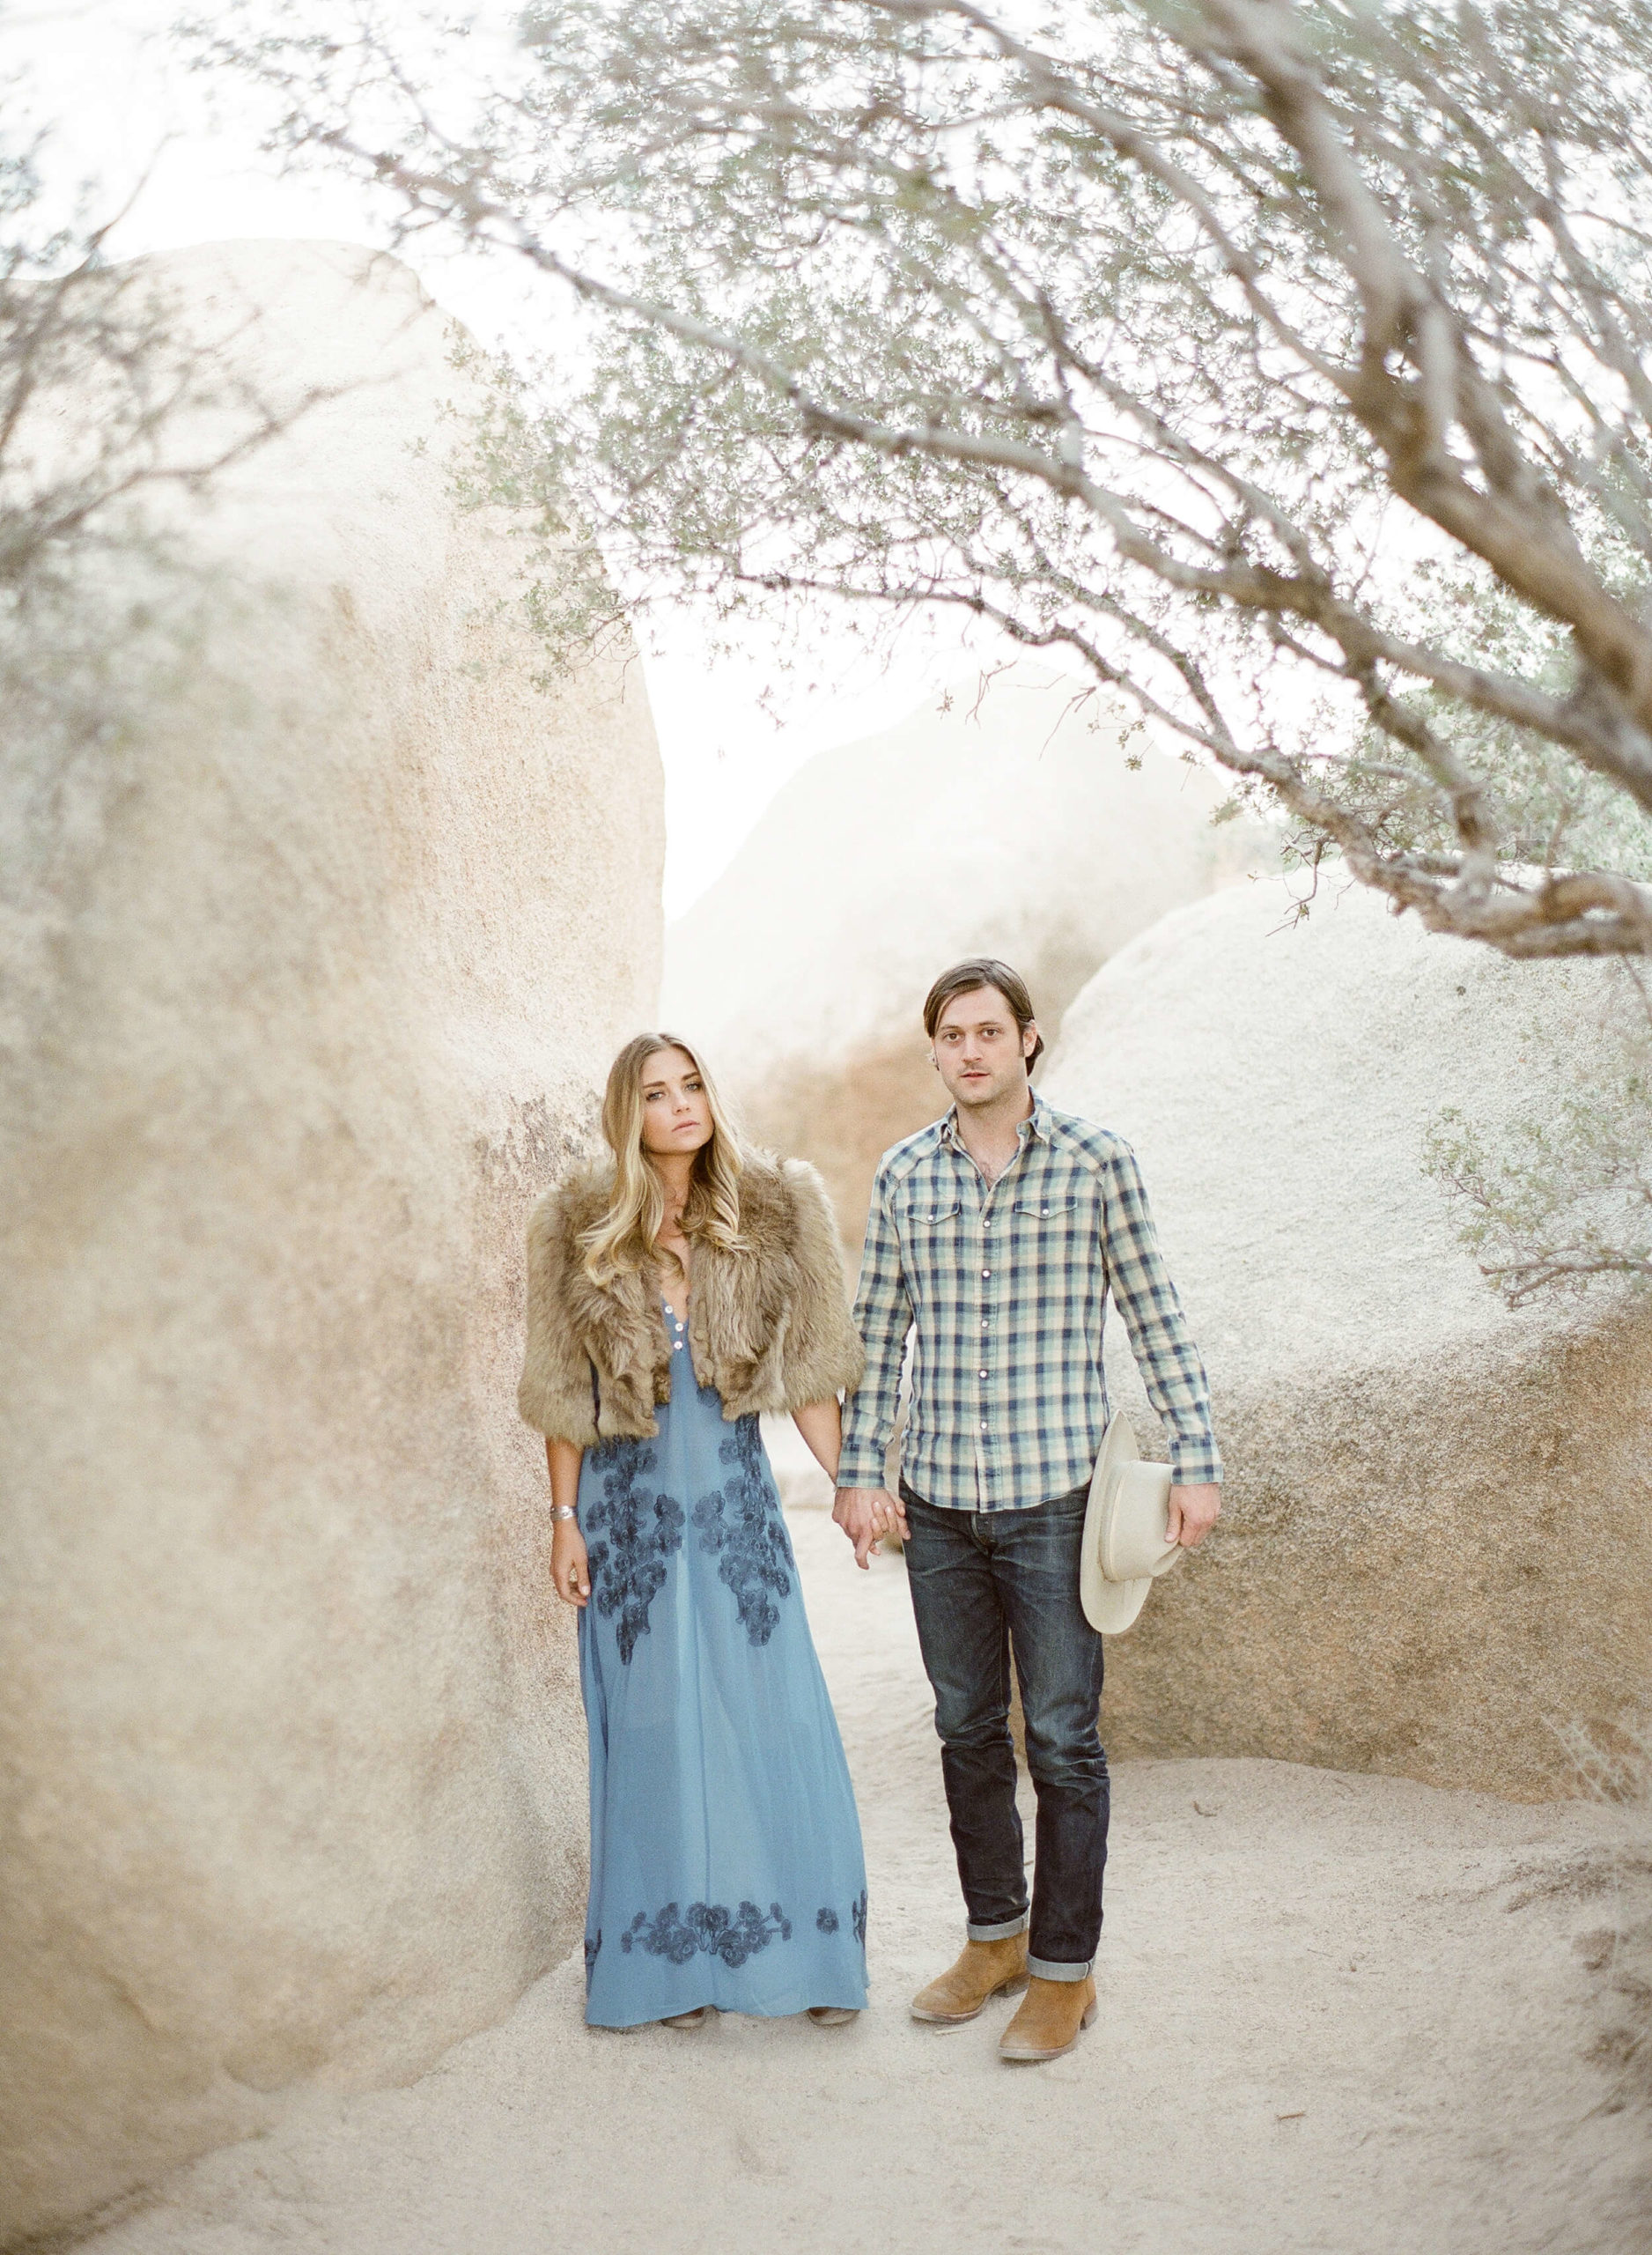 a styled and curated engagement session wardrobe is a benefit of hiring a bridal stylist